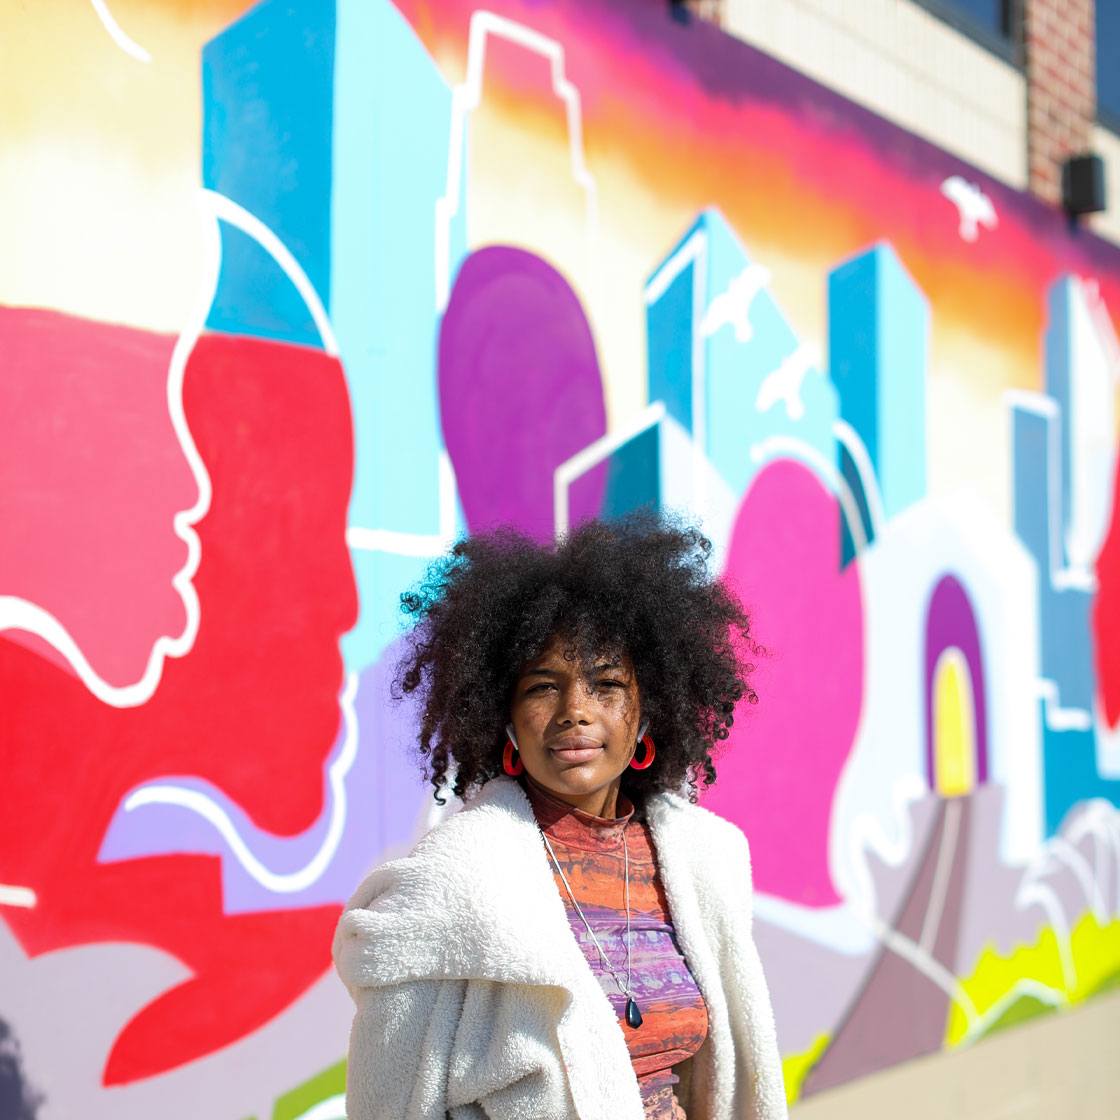 A mural painted with acrylic and spray paints depicting faces and buildings intermingling to represent the city of Minneapolis working together in unity. Apprentice Bereket Weddall poses in front of the mural.